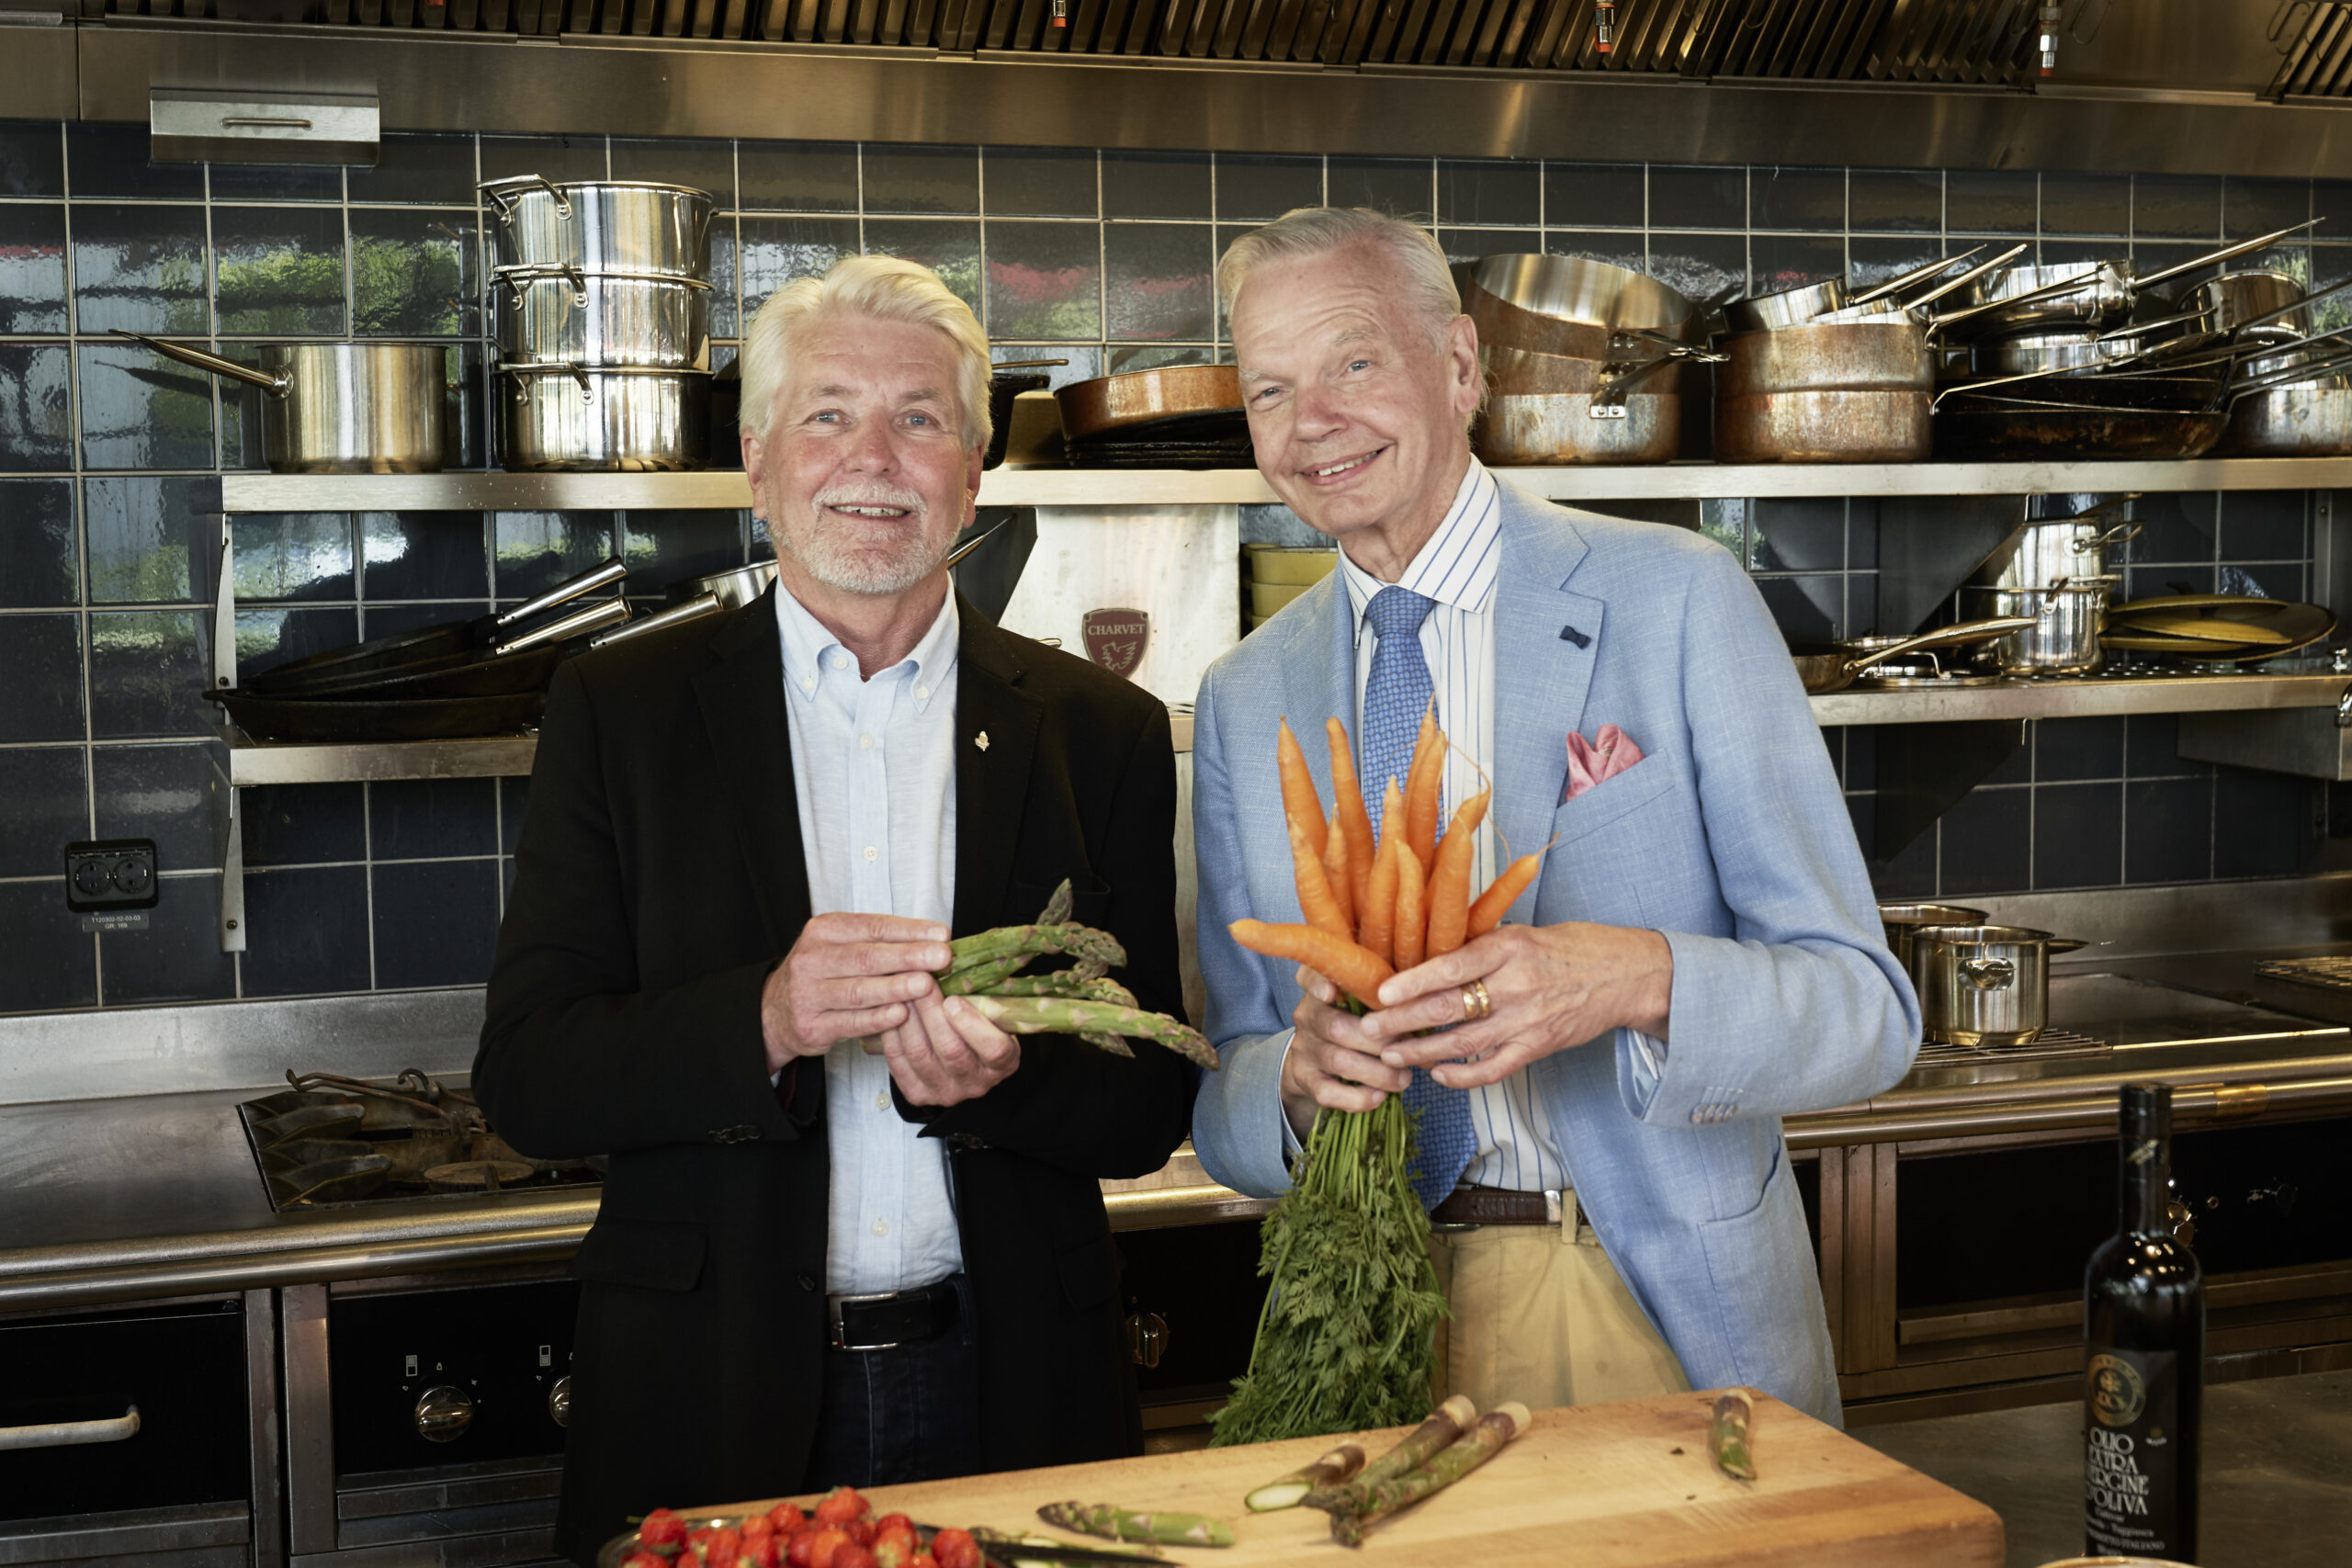 Leif Bergsten from People’s Houses & Parks developed the original idea for Sweden’s new County Meals together with Carl Jan Granqvist from Gastronomiska Akademien.